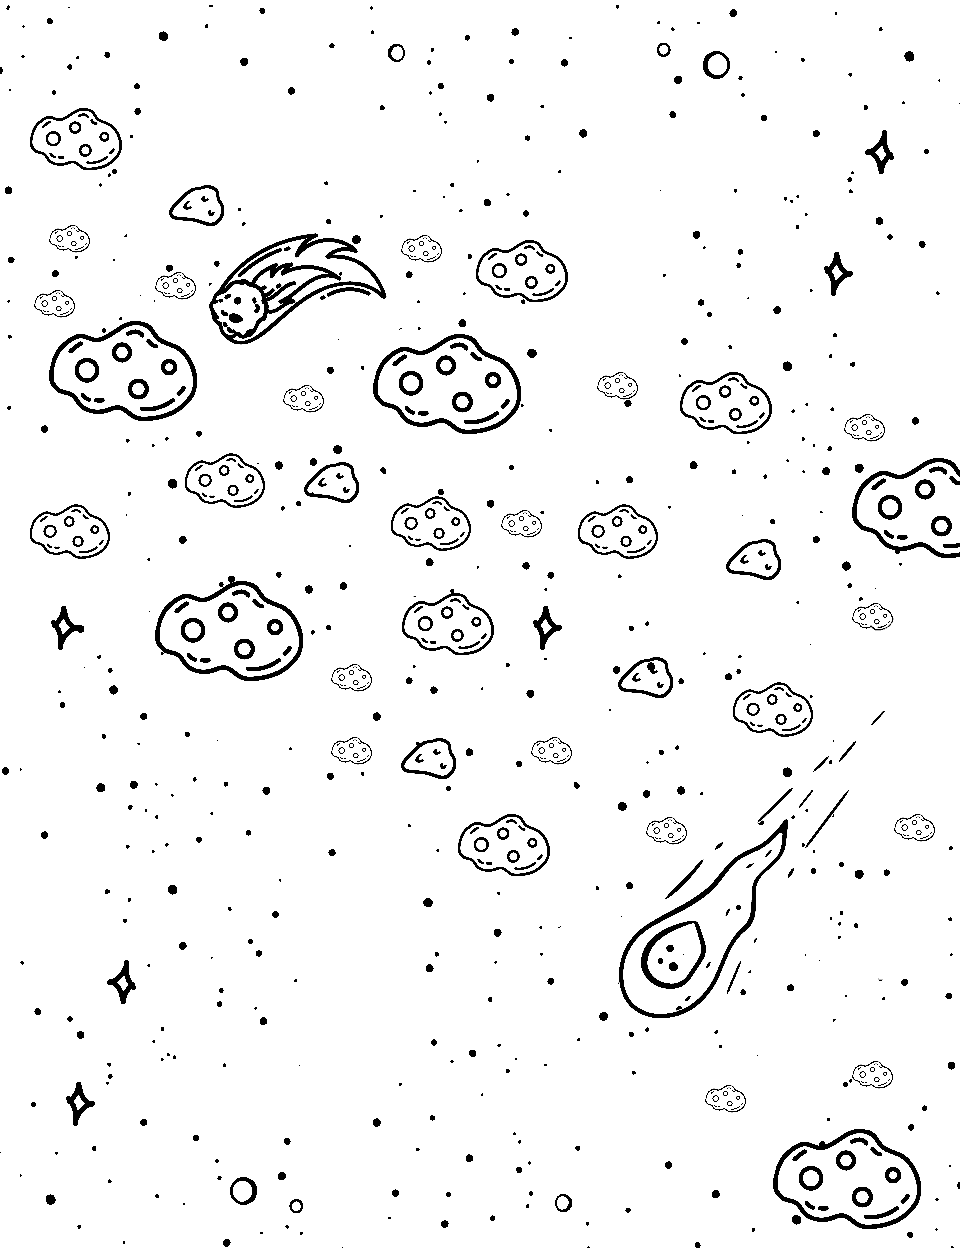 Asteroid Belt Adventure Coloring Page - Various-sized asteroids clustered in a belt formation.